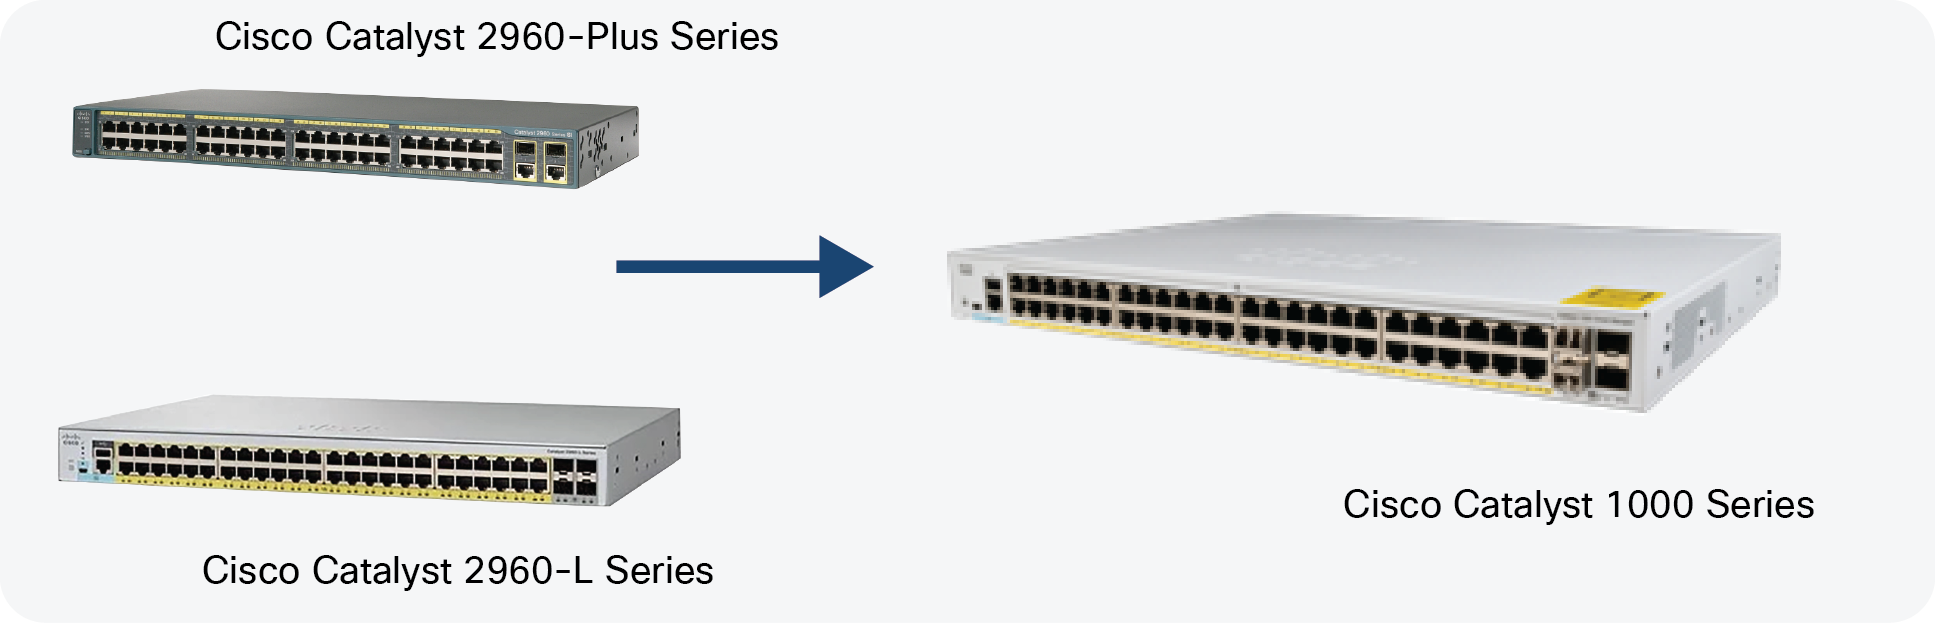 Cisco Catalyst 2960-L, 2960-Plus, and 1000 Series Switches